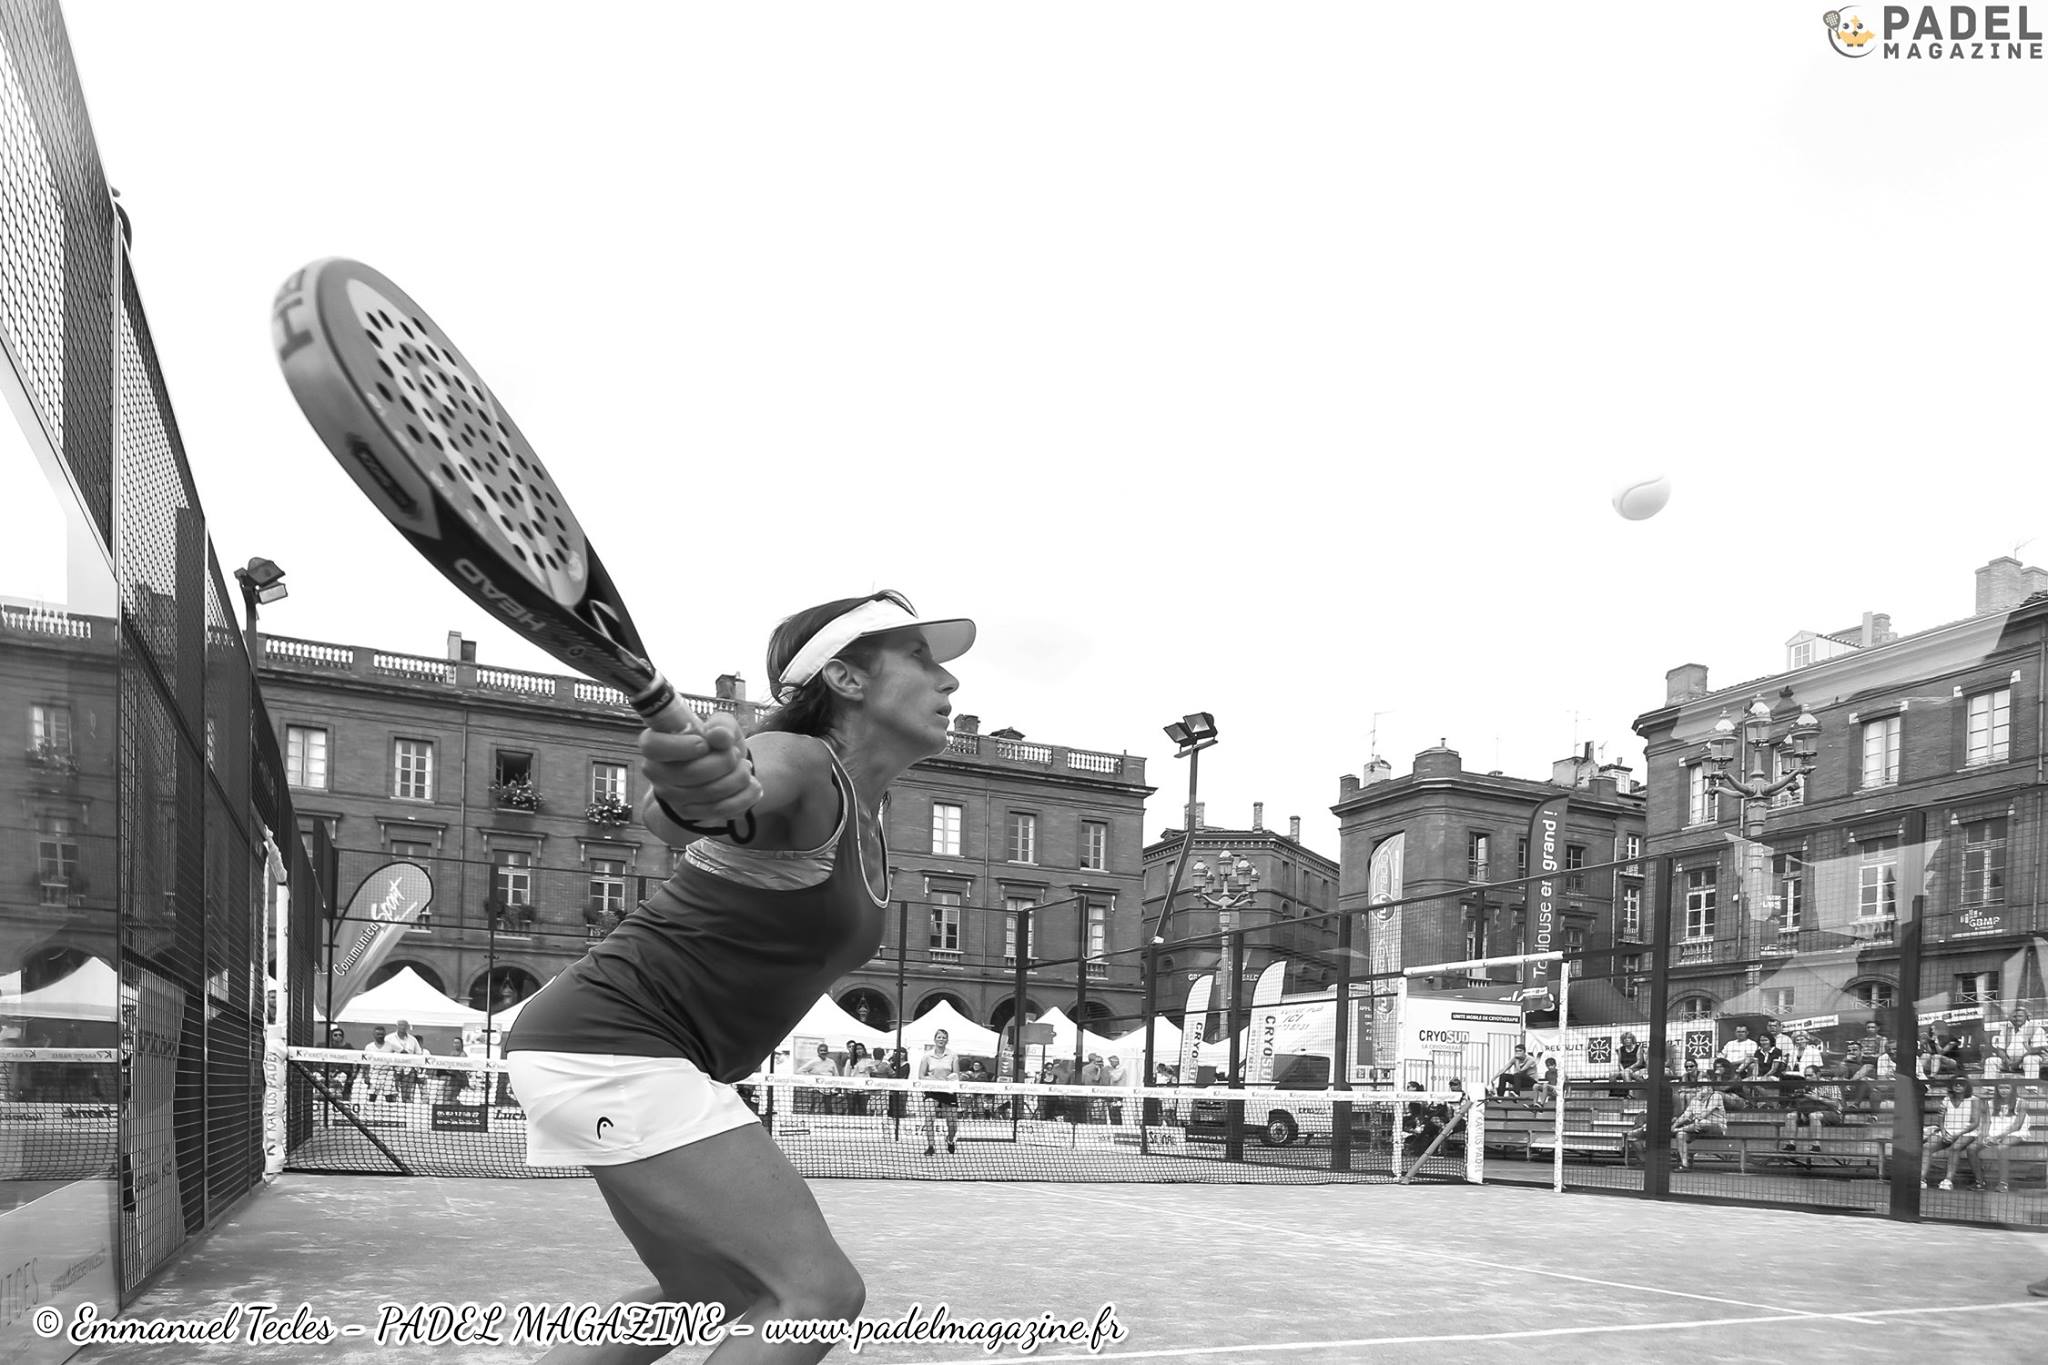 Geraldine Sorel: “The padel, it is above all a team ”